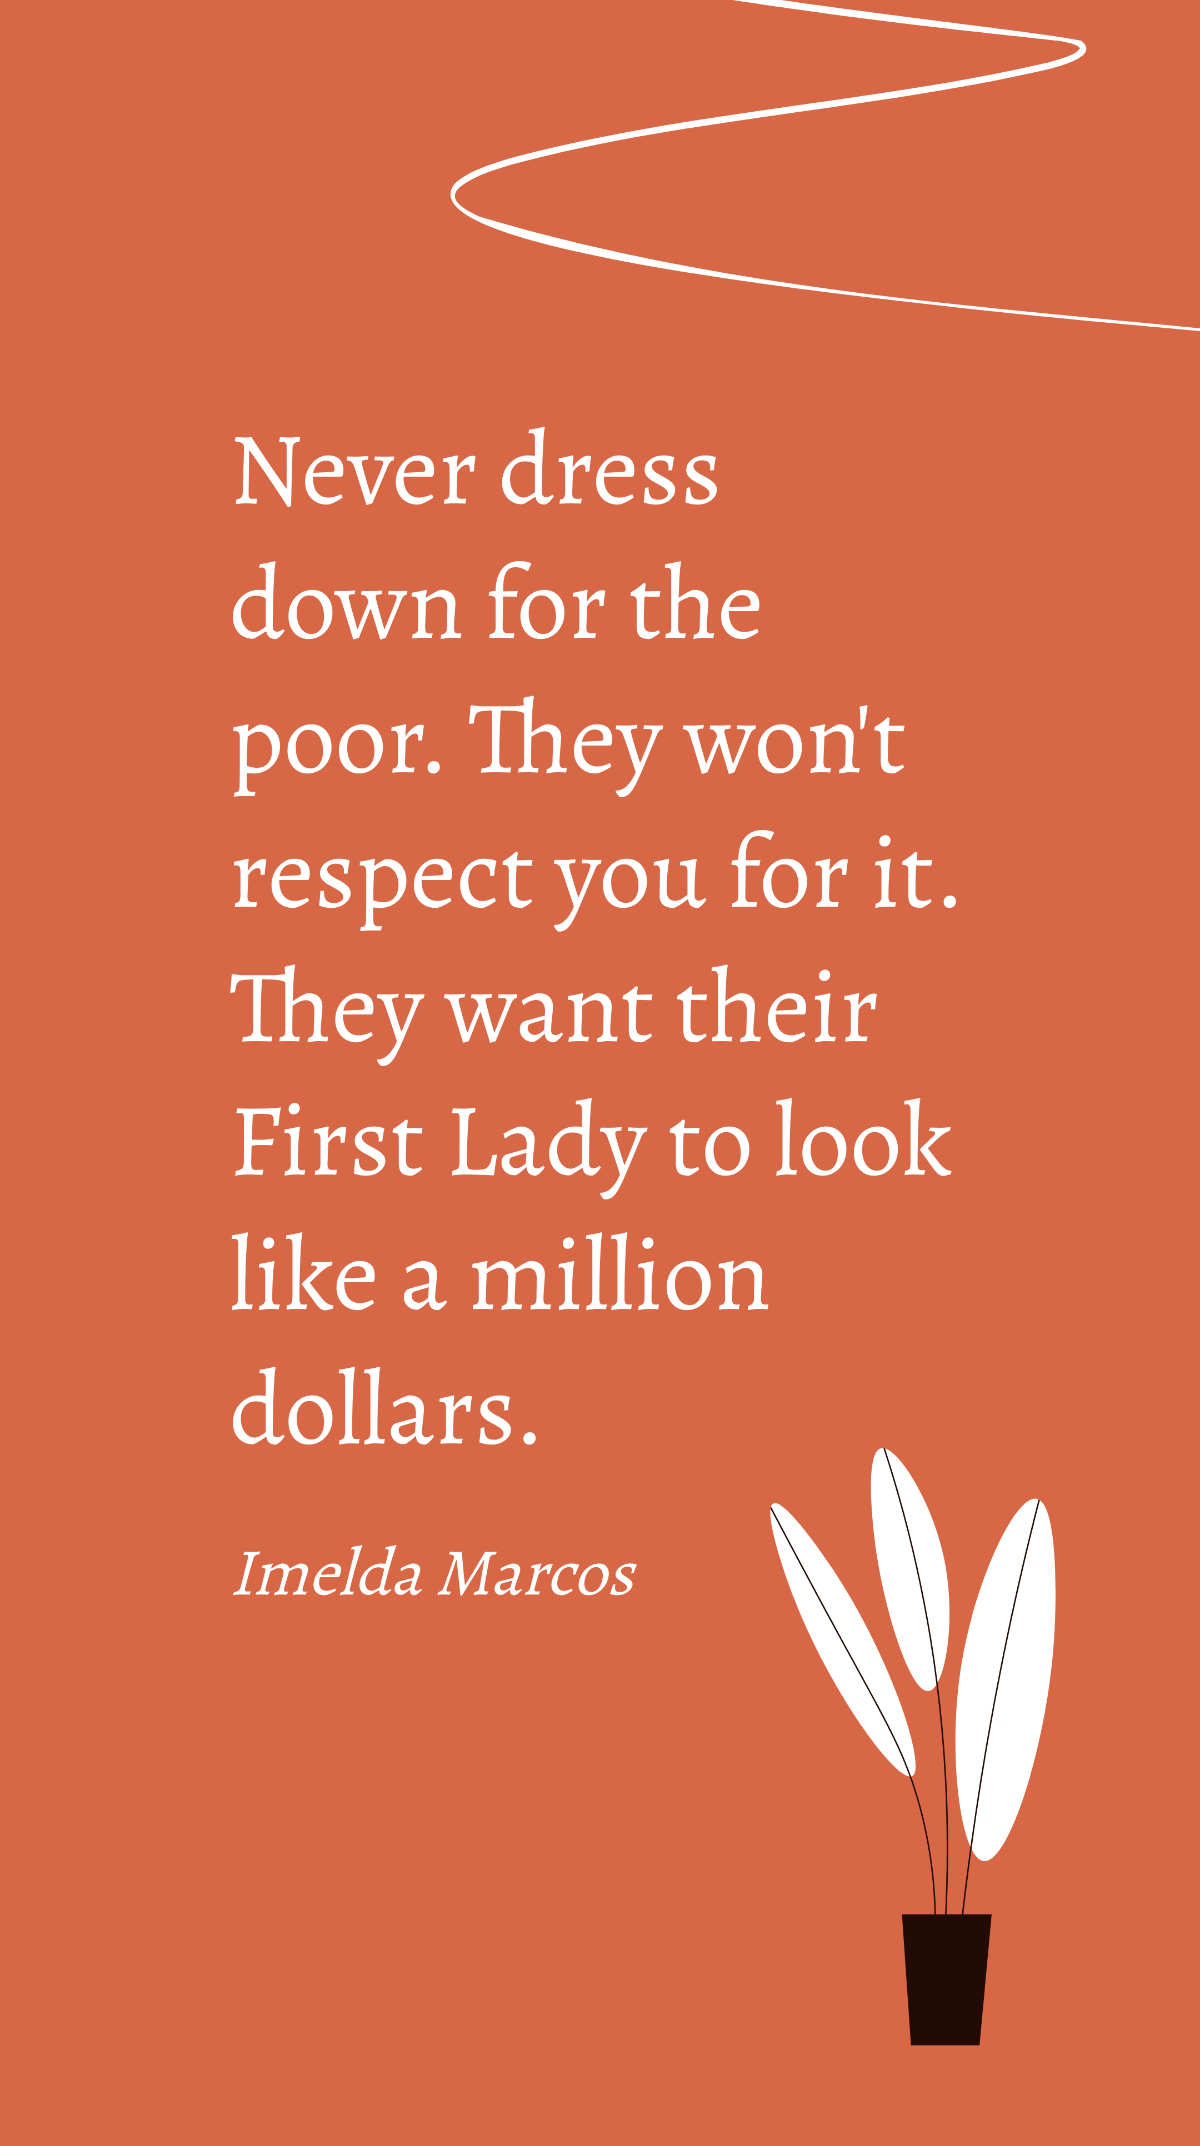 Imelda Marcos- Never dress down for the poor. They won't respect you for it. They want their First Lady to look like a million dollars. Template